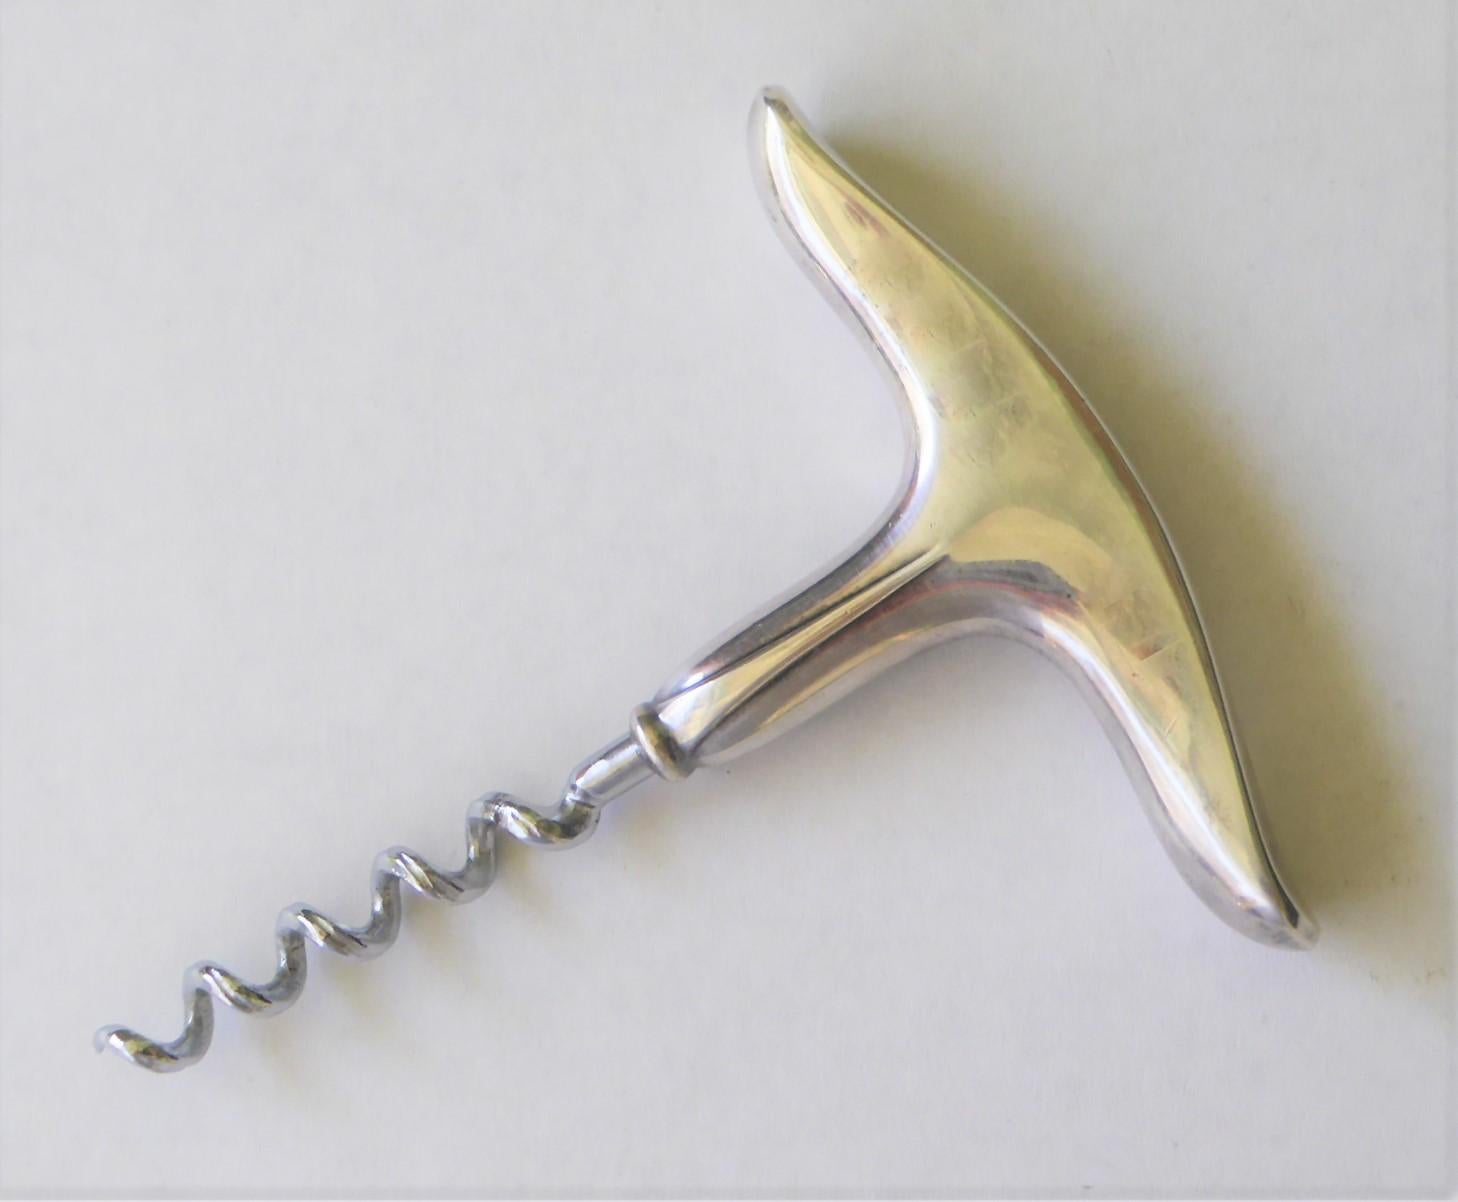 Vintage 1960s modernist Knud Möller sterling silver and steel wine opener, W&S Sörensen, Denmark, 20th century with the style name Patricia.. Danish, this Mid-Century Modern wine Corkscrew is stamped W&S Sorensen, Sterling, Denmark. This